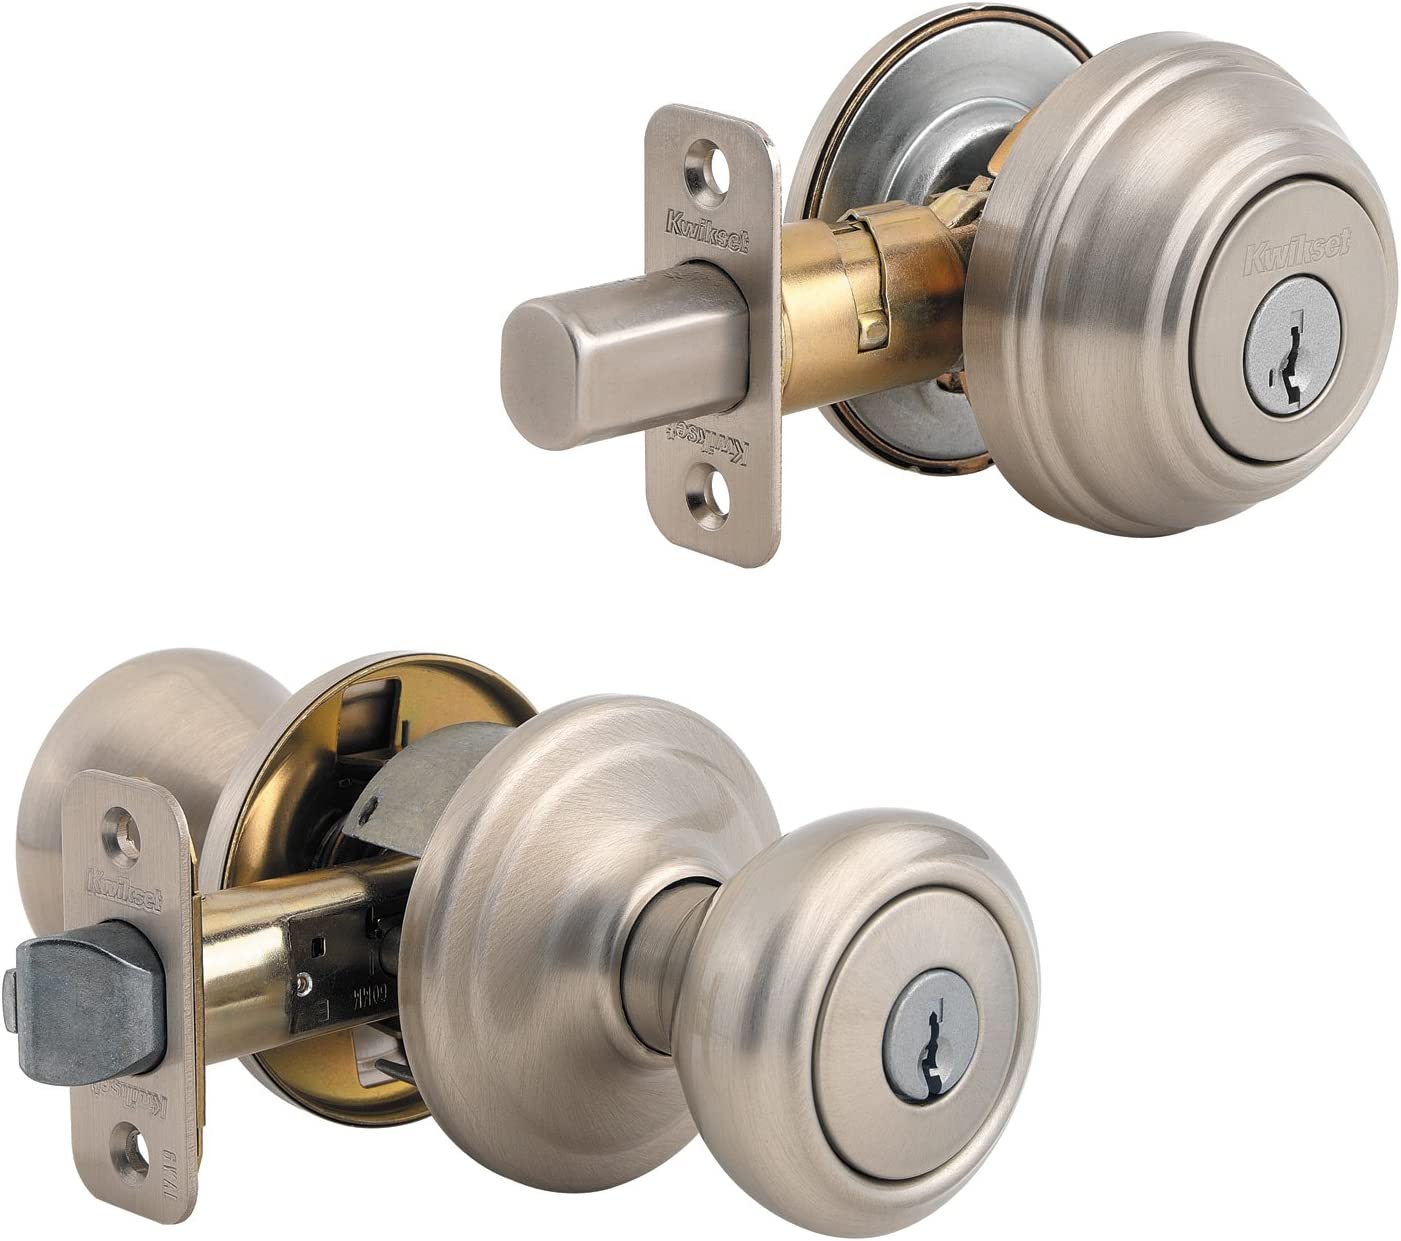 Kwikset Cameron Keyed Entry Door Knob and Single Cylinder Deadbolt Combo Pack with Microban Antimicrobial Protection featuring SmartKey Security in Satin Nickel